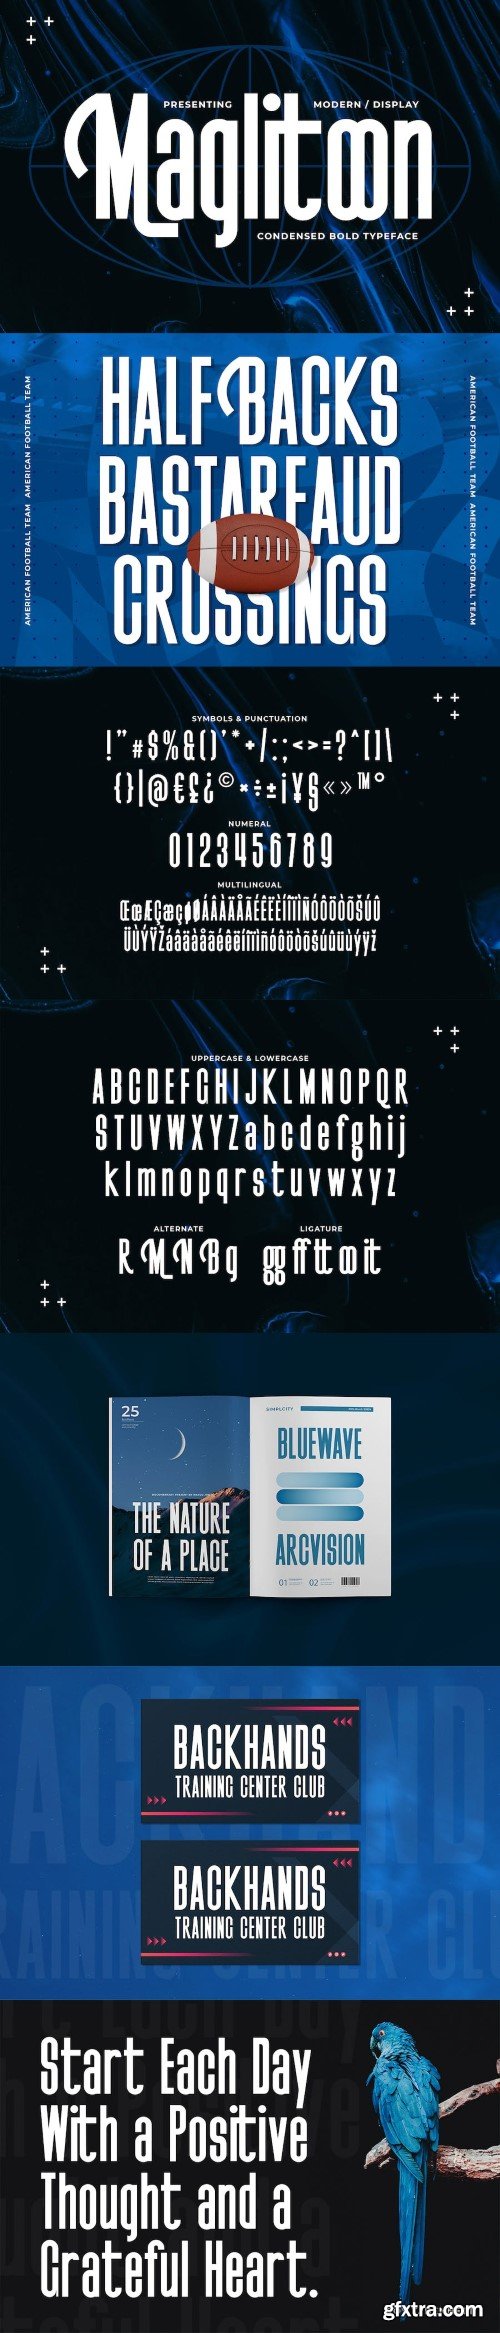 Maglitoon - Condensed Bold Typeface